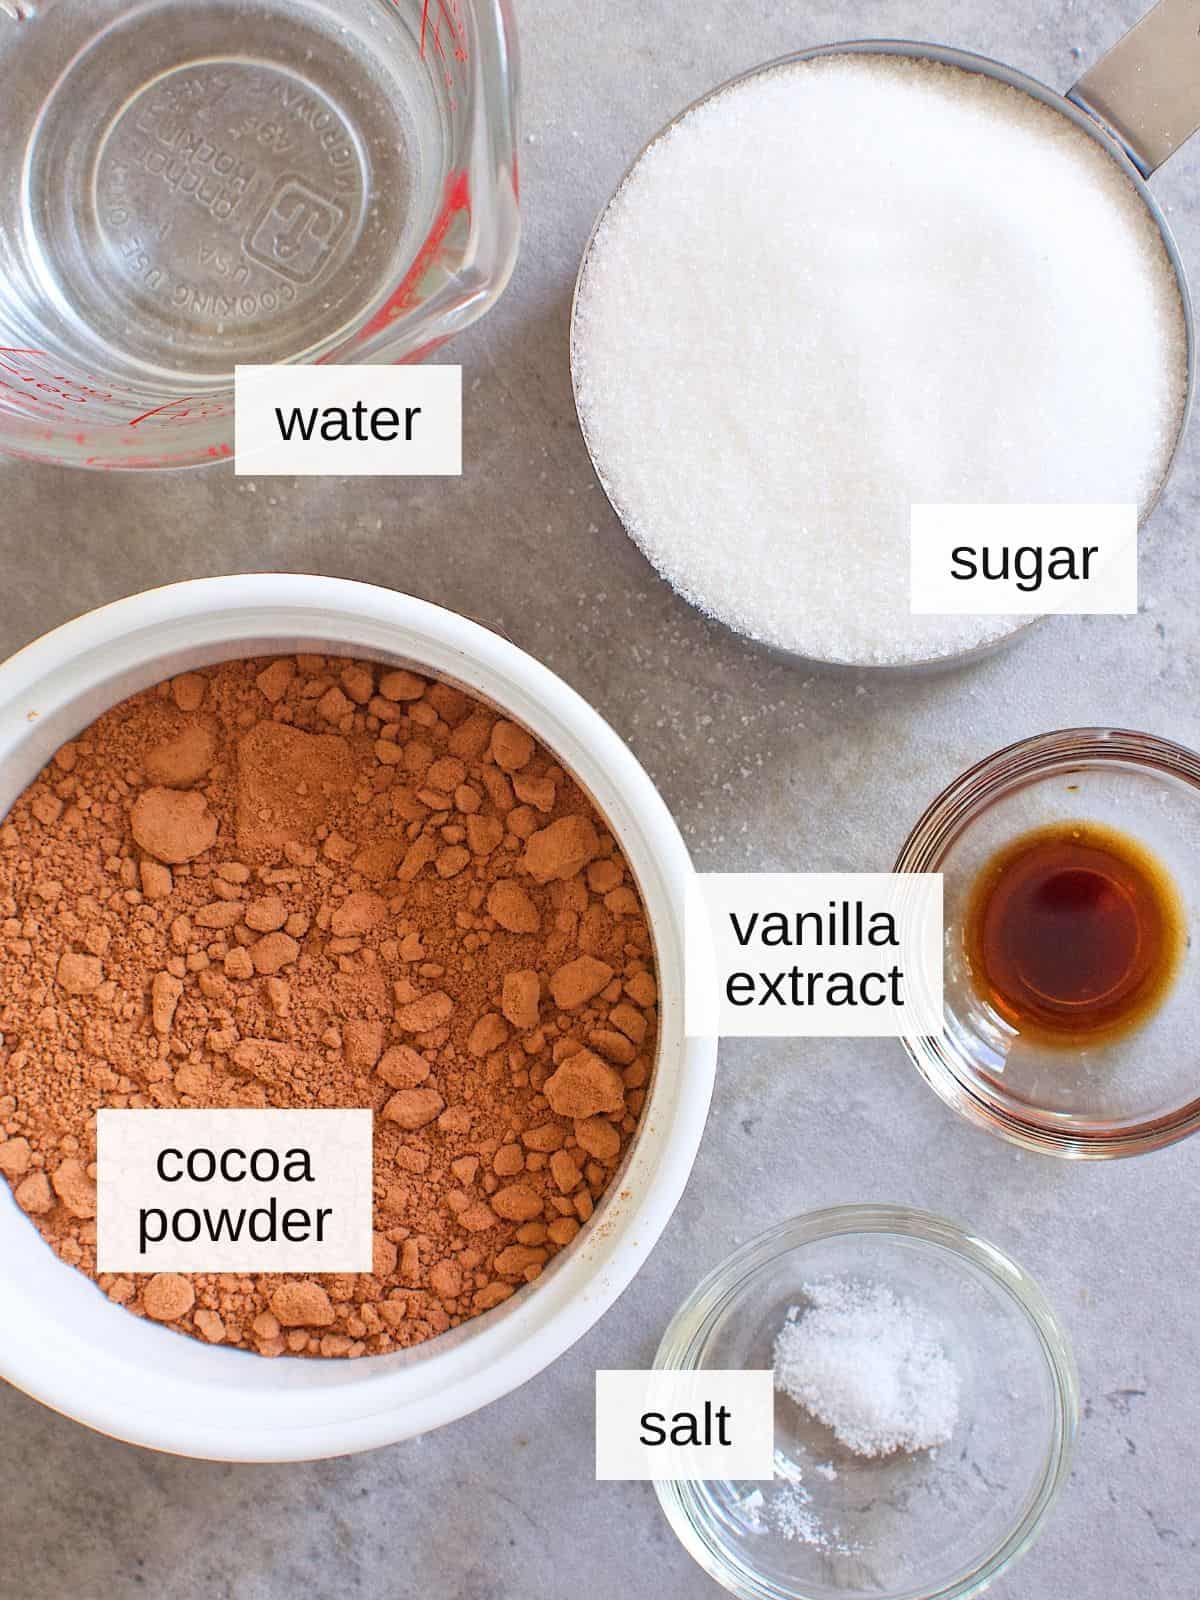 ingredients for chocolate syrup, including water, sugar, cocoa powder, vanilla extract, and salt.